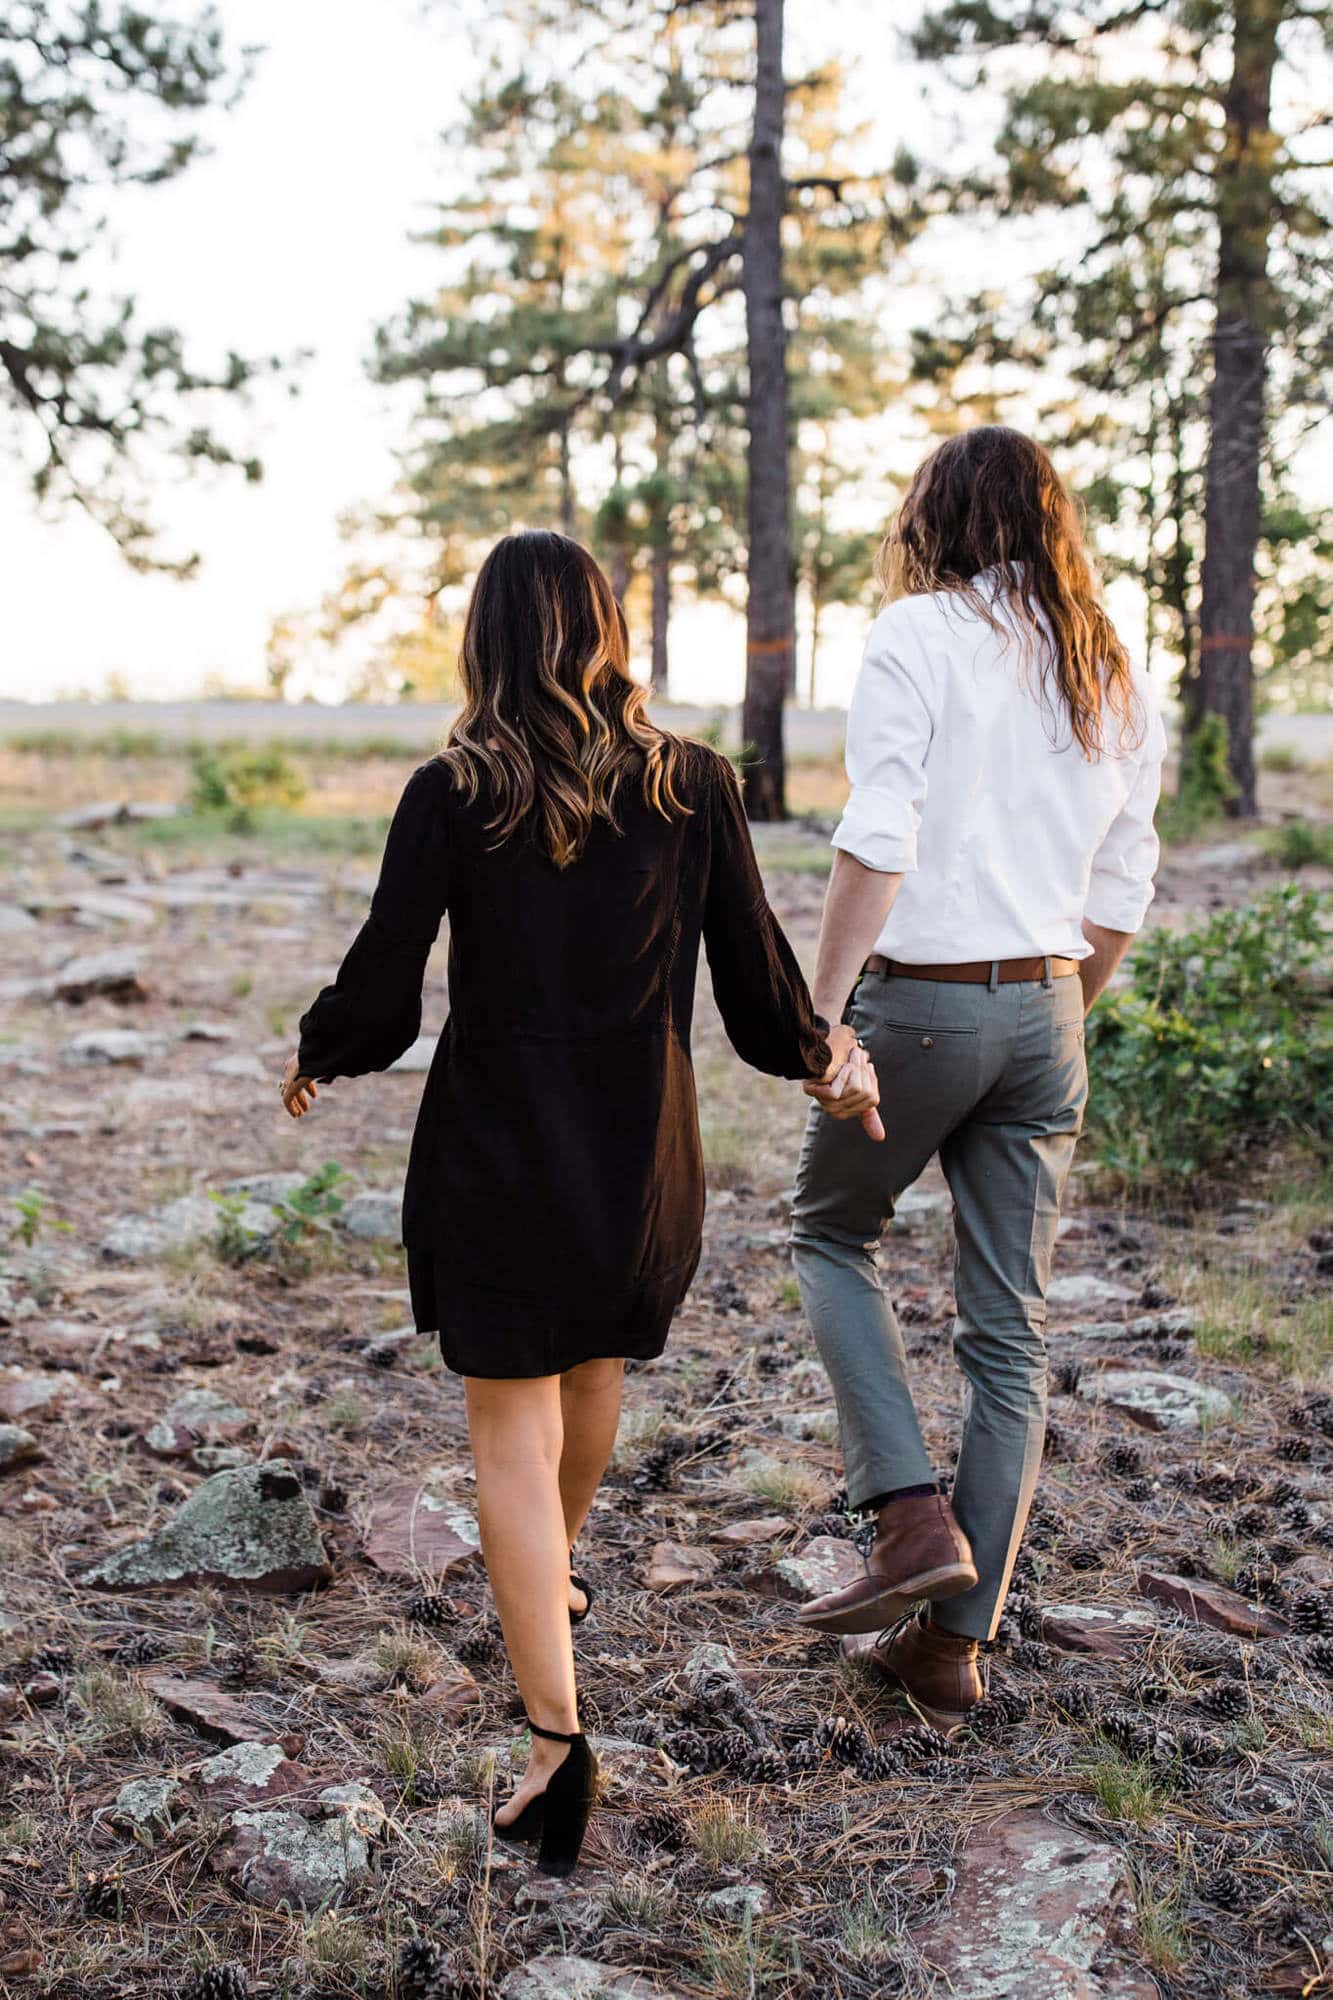 Believe it or not these adventurous Pine Forest Engagment photos were taken in Arizona. The Mogollon Rim is the perfect spot for adventure and forest vibes.